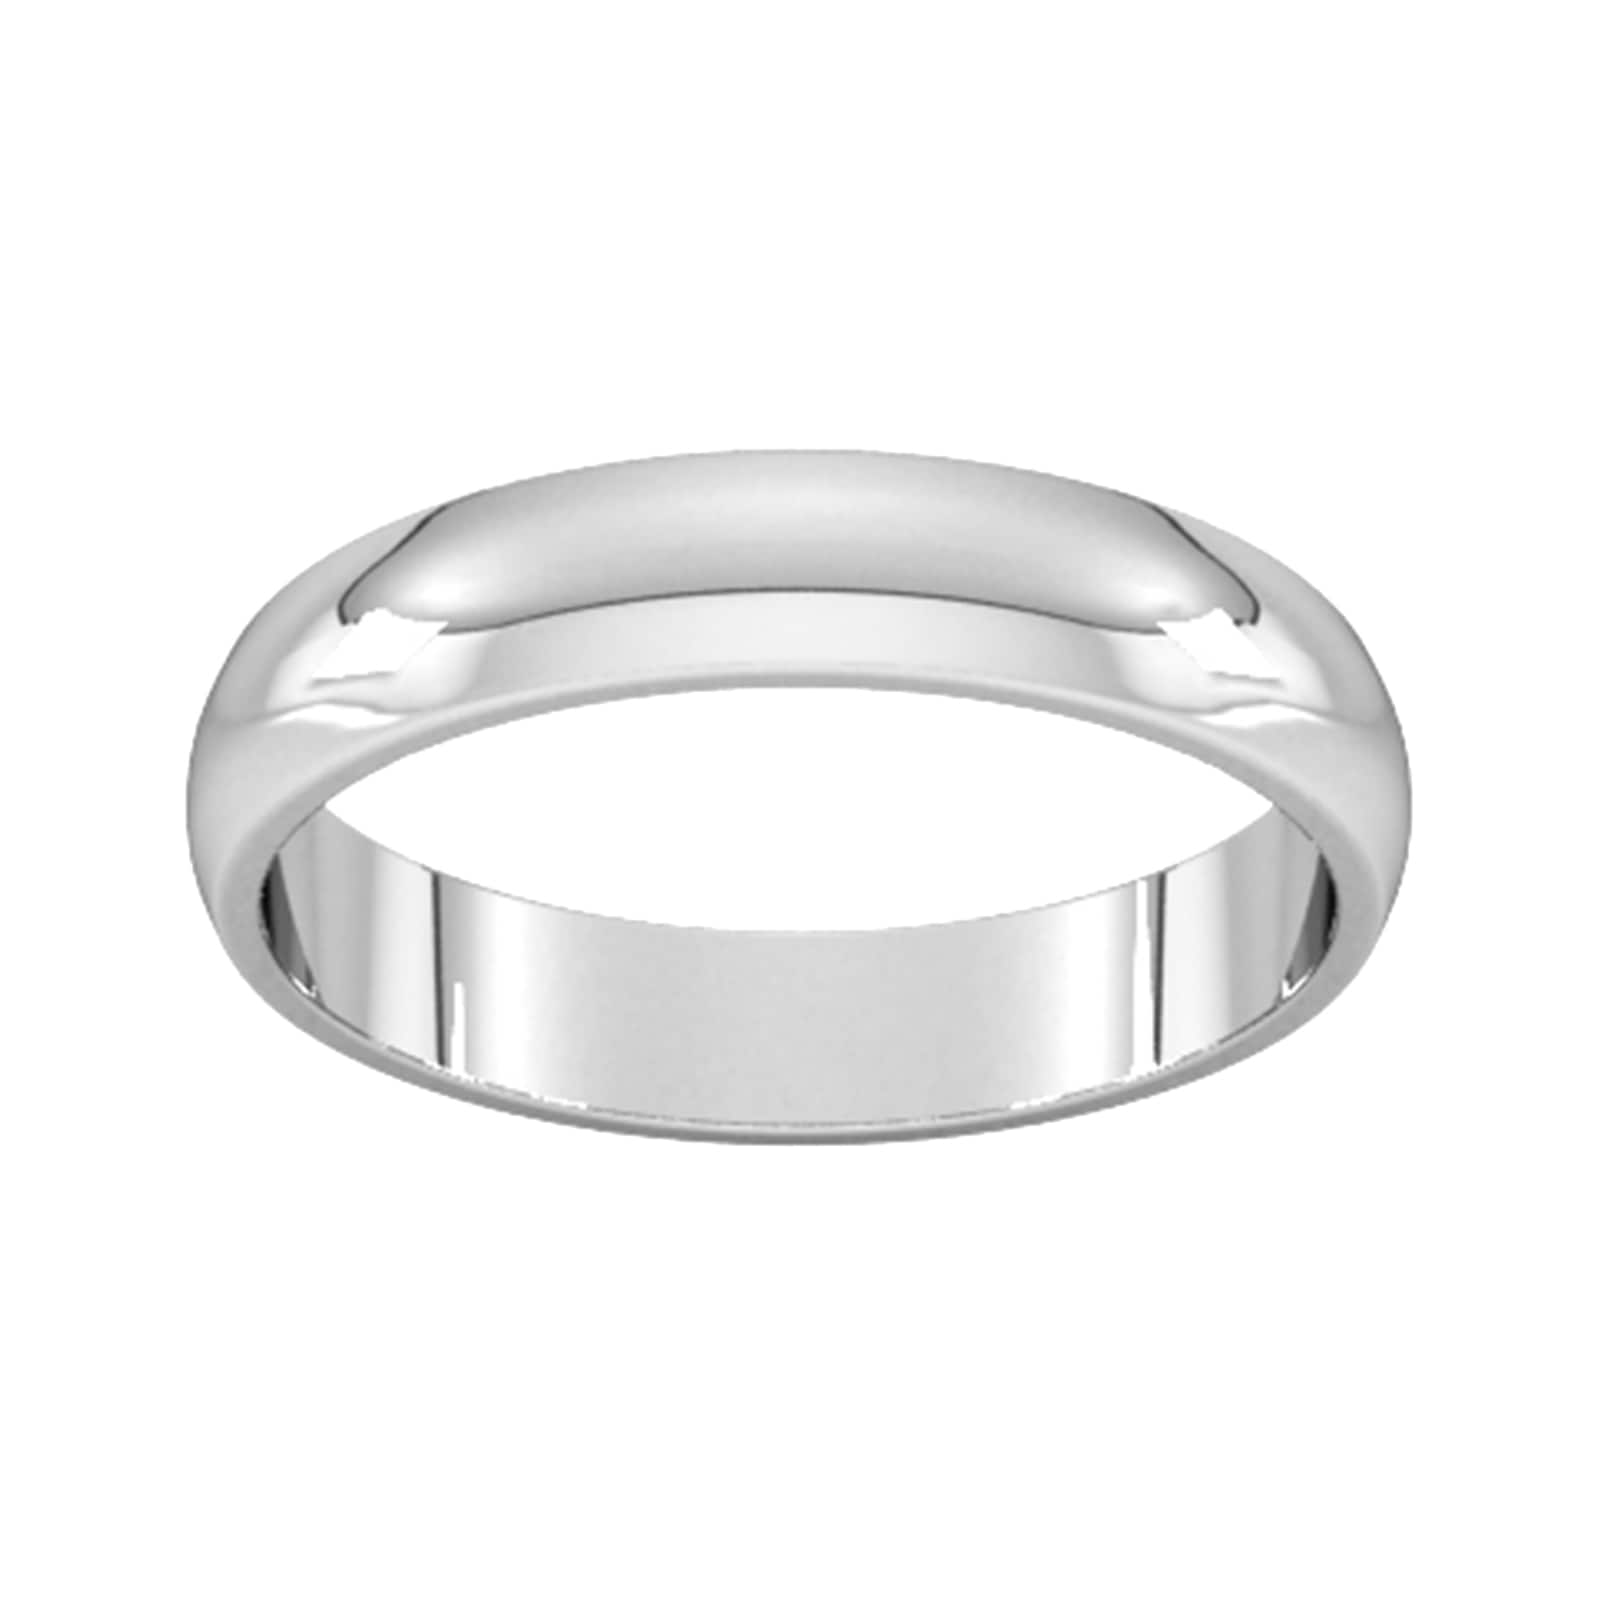 4mm D Shape Standard Wedding Ring In Sterling Silver - Ring Size Q